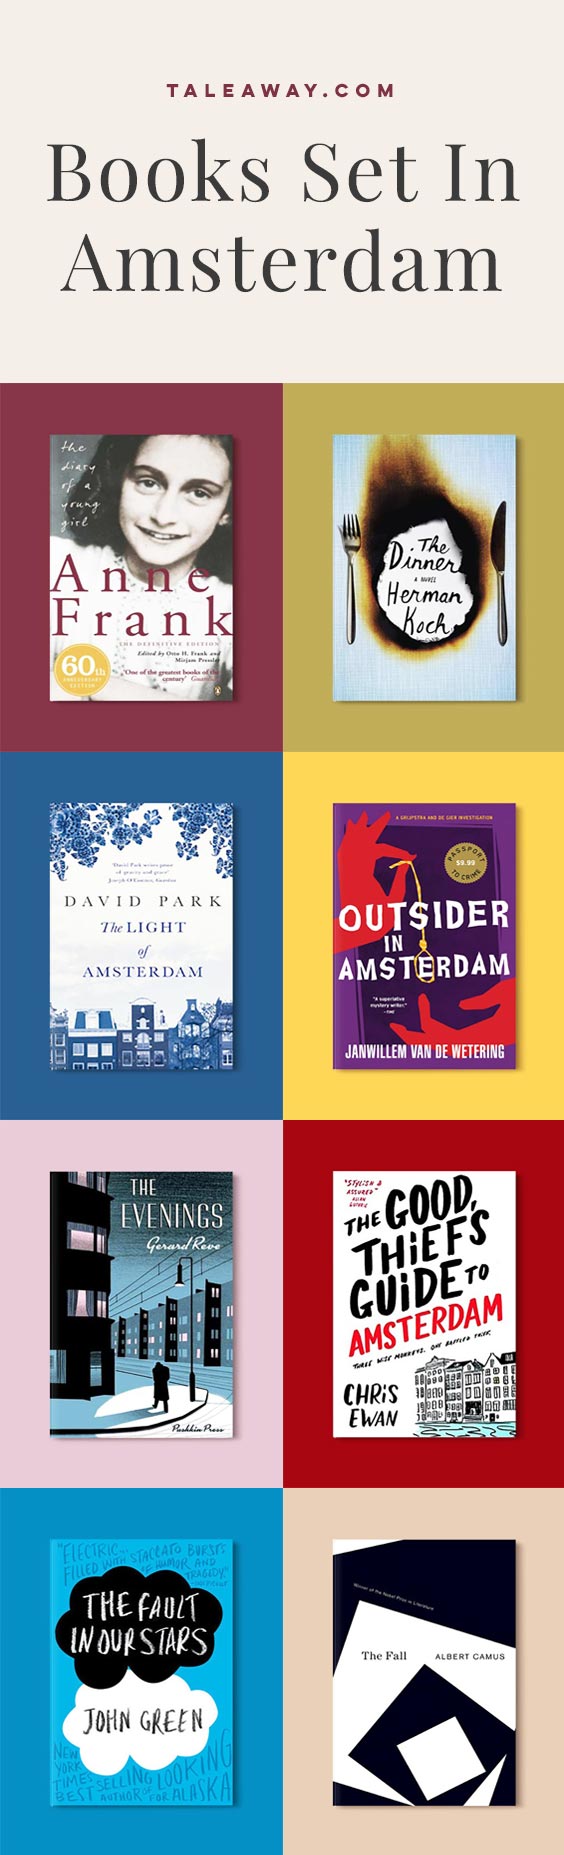 Books Set In Amsterdam. For more books visit www.taleway.com to find books set around the world. Ideas for those who like to travel, both in life and in fiction. #books #novels #bookworm #booklover #fiction #travel #amsterdam